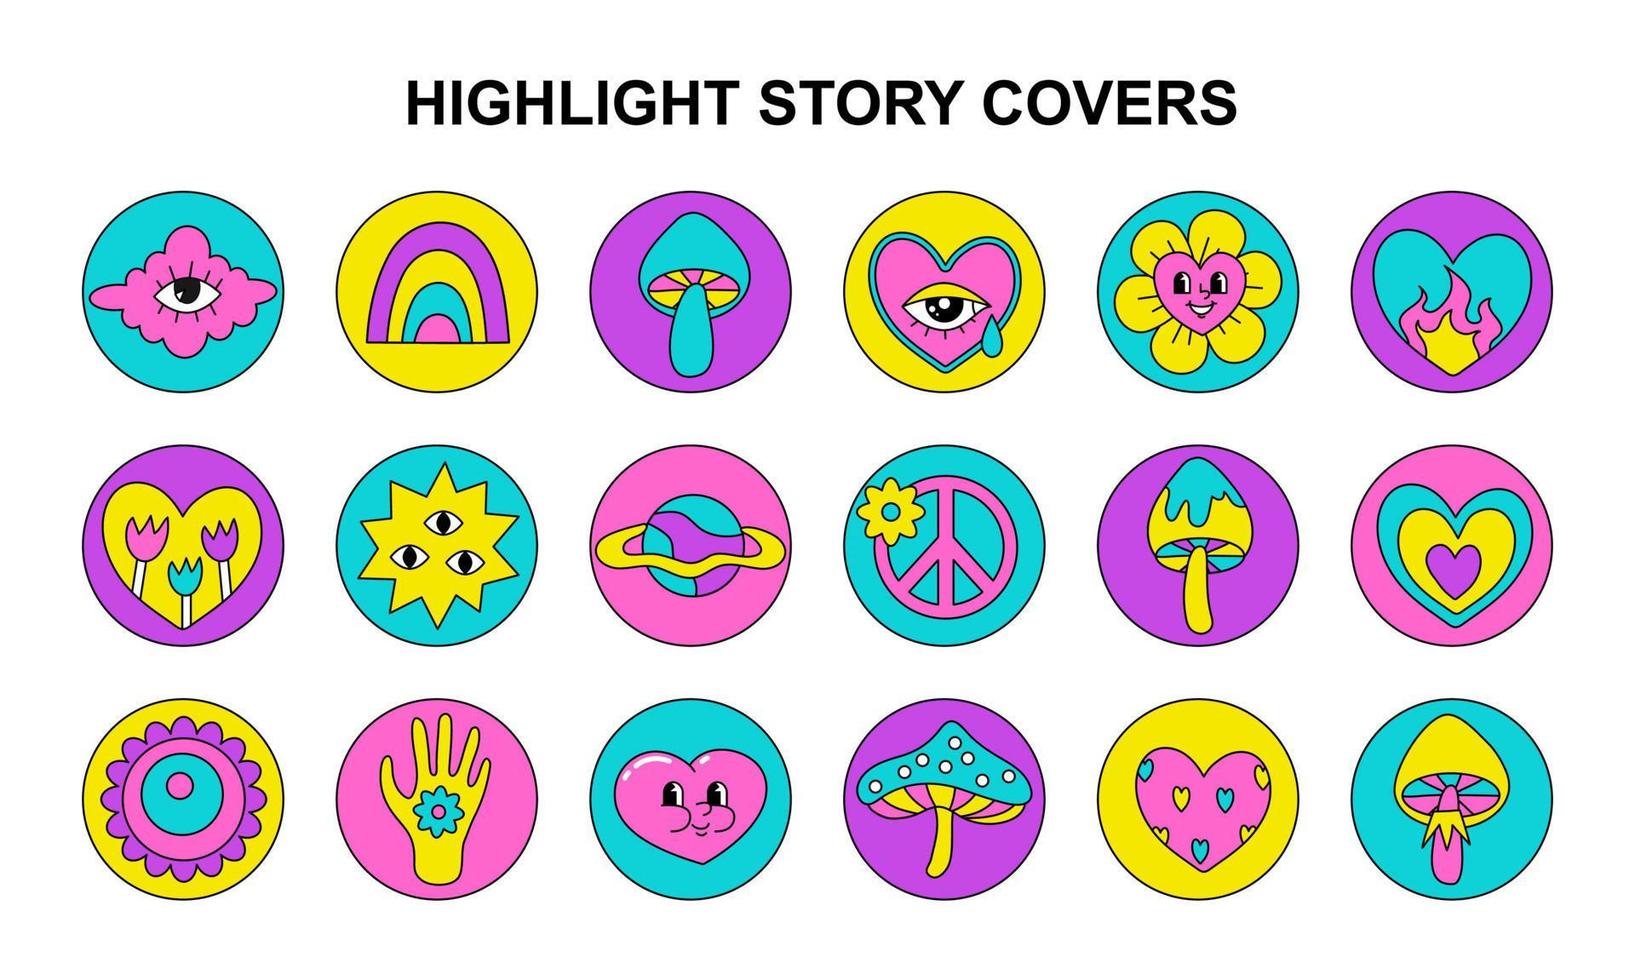 A set of highlights story covers. Templates for bloggers. 18 bright icons in the hippie style. Funny icons vector